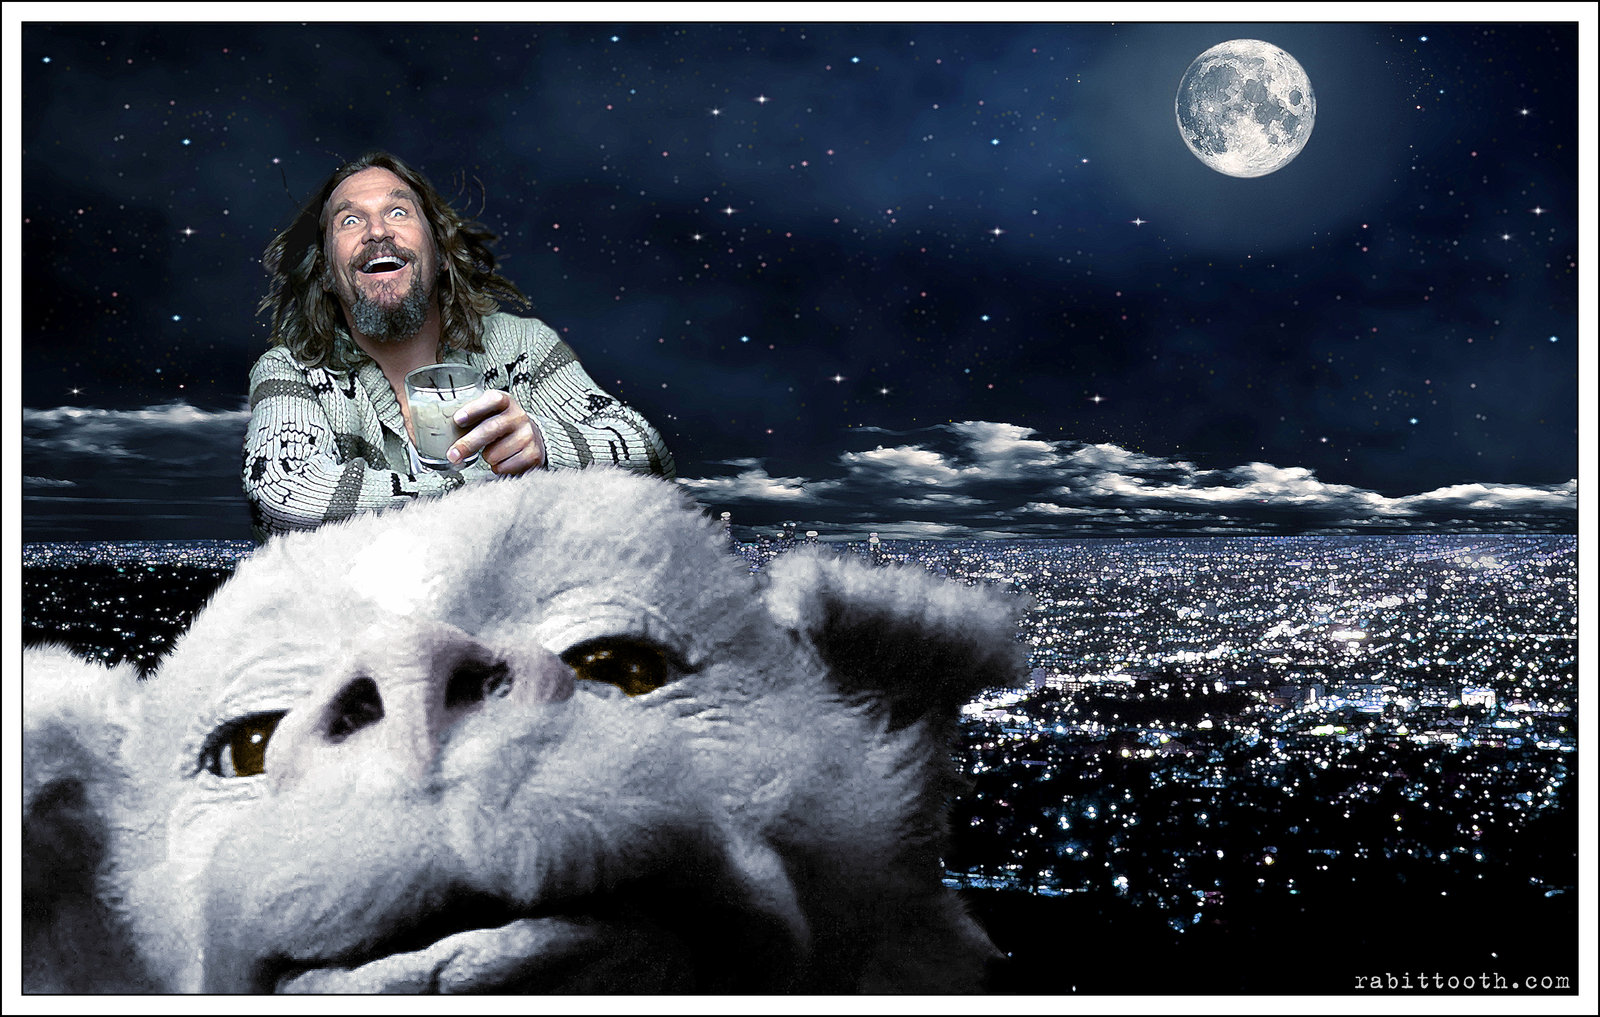 Dude Riding Falcor Lebowski Neverending Story by Rabittooth on